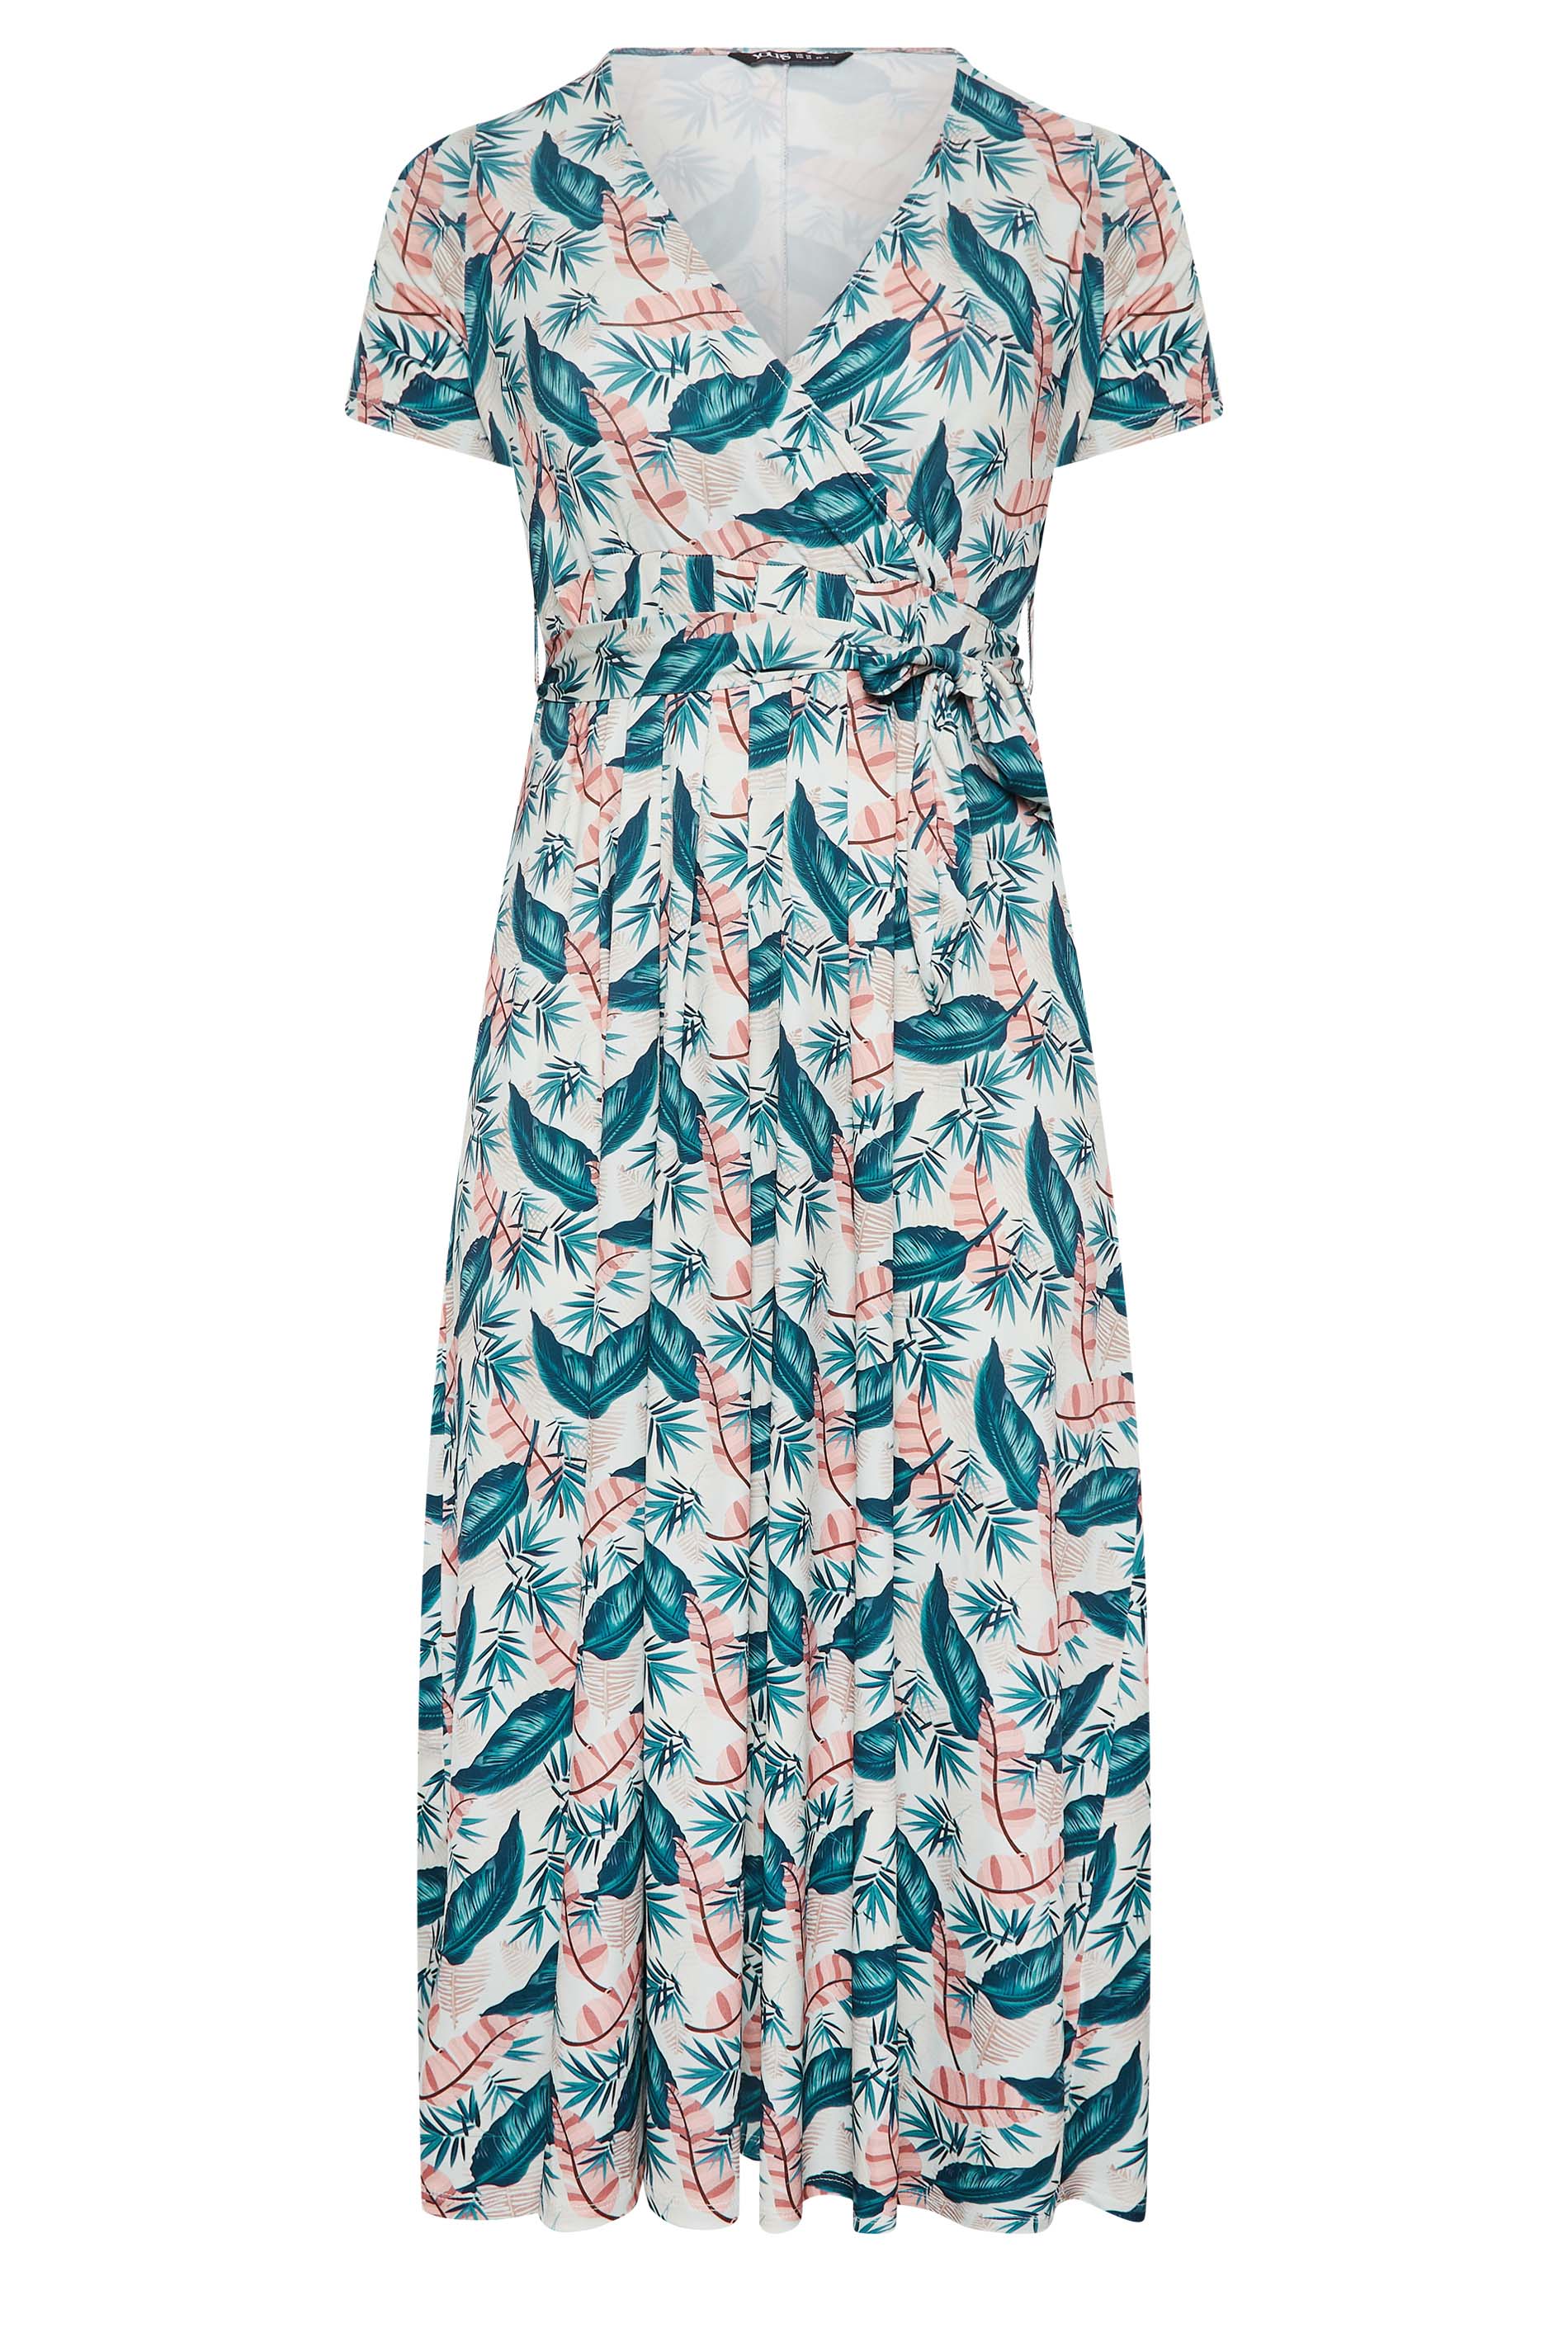 YOURS Curve Blue Leaf Print Maxi Wrap Dress | Yours Clothing